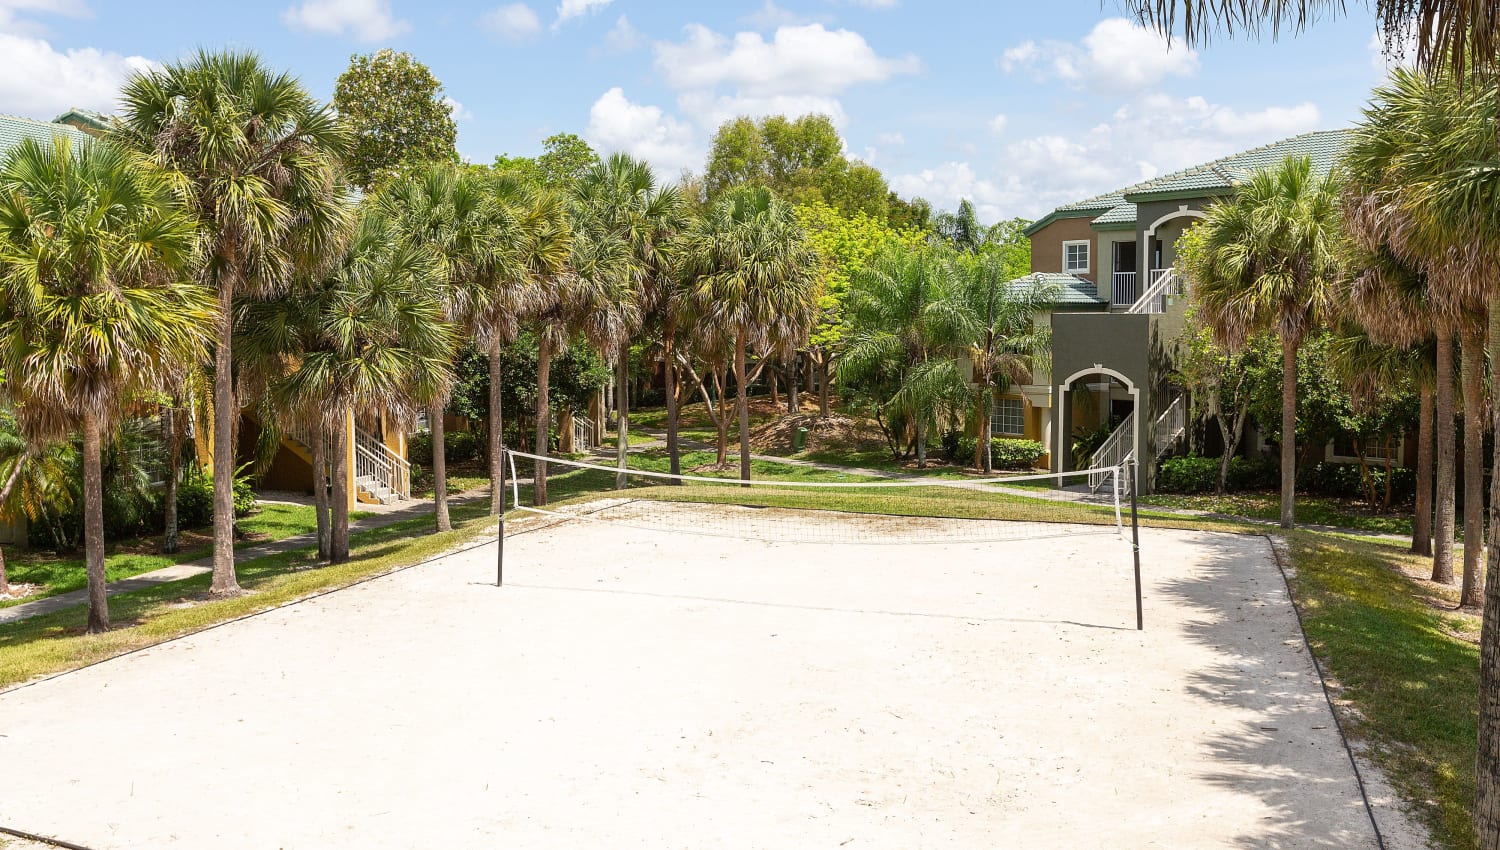 Sand volleyball court at Club Lake Pointe Apartments in Coral Springs, Florida